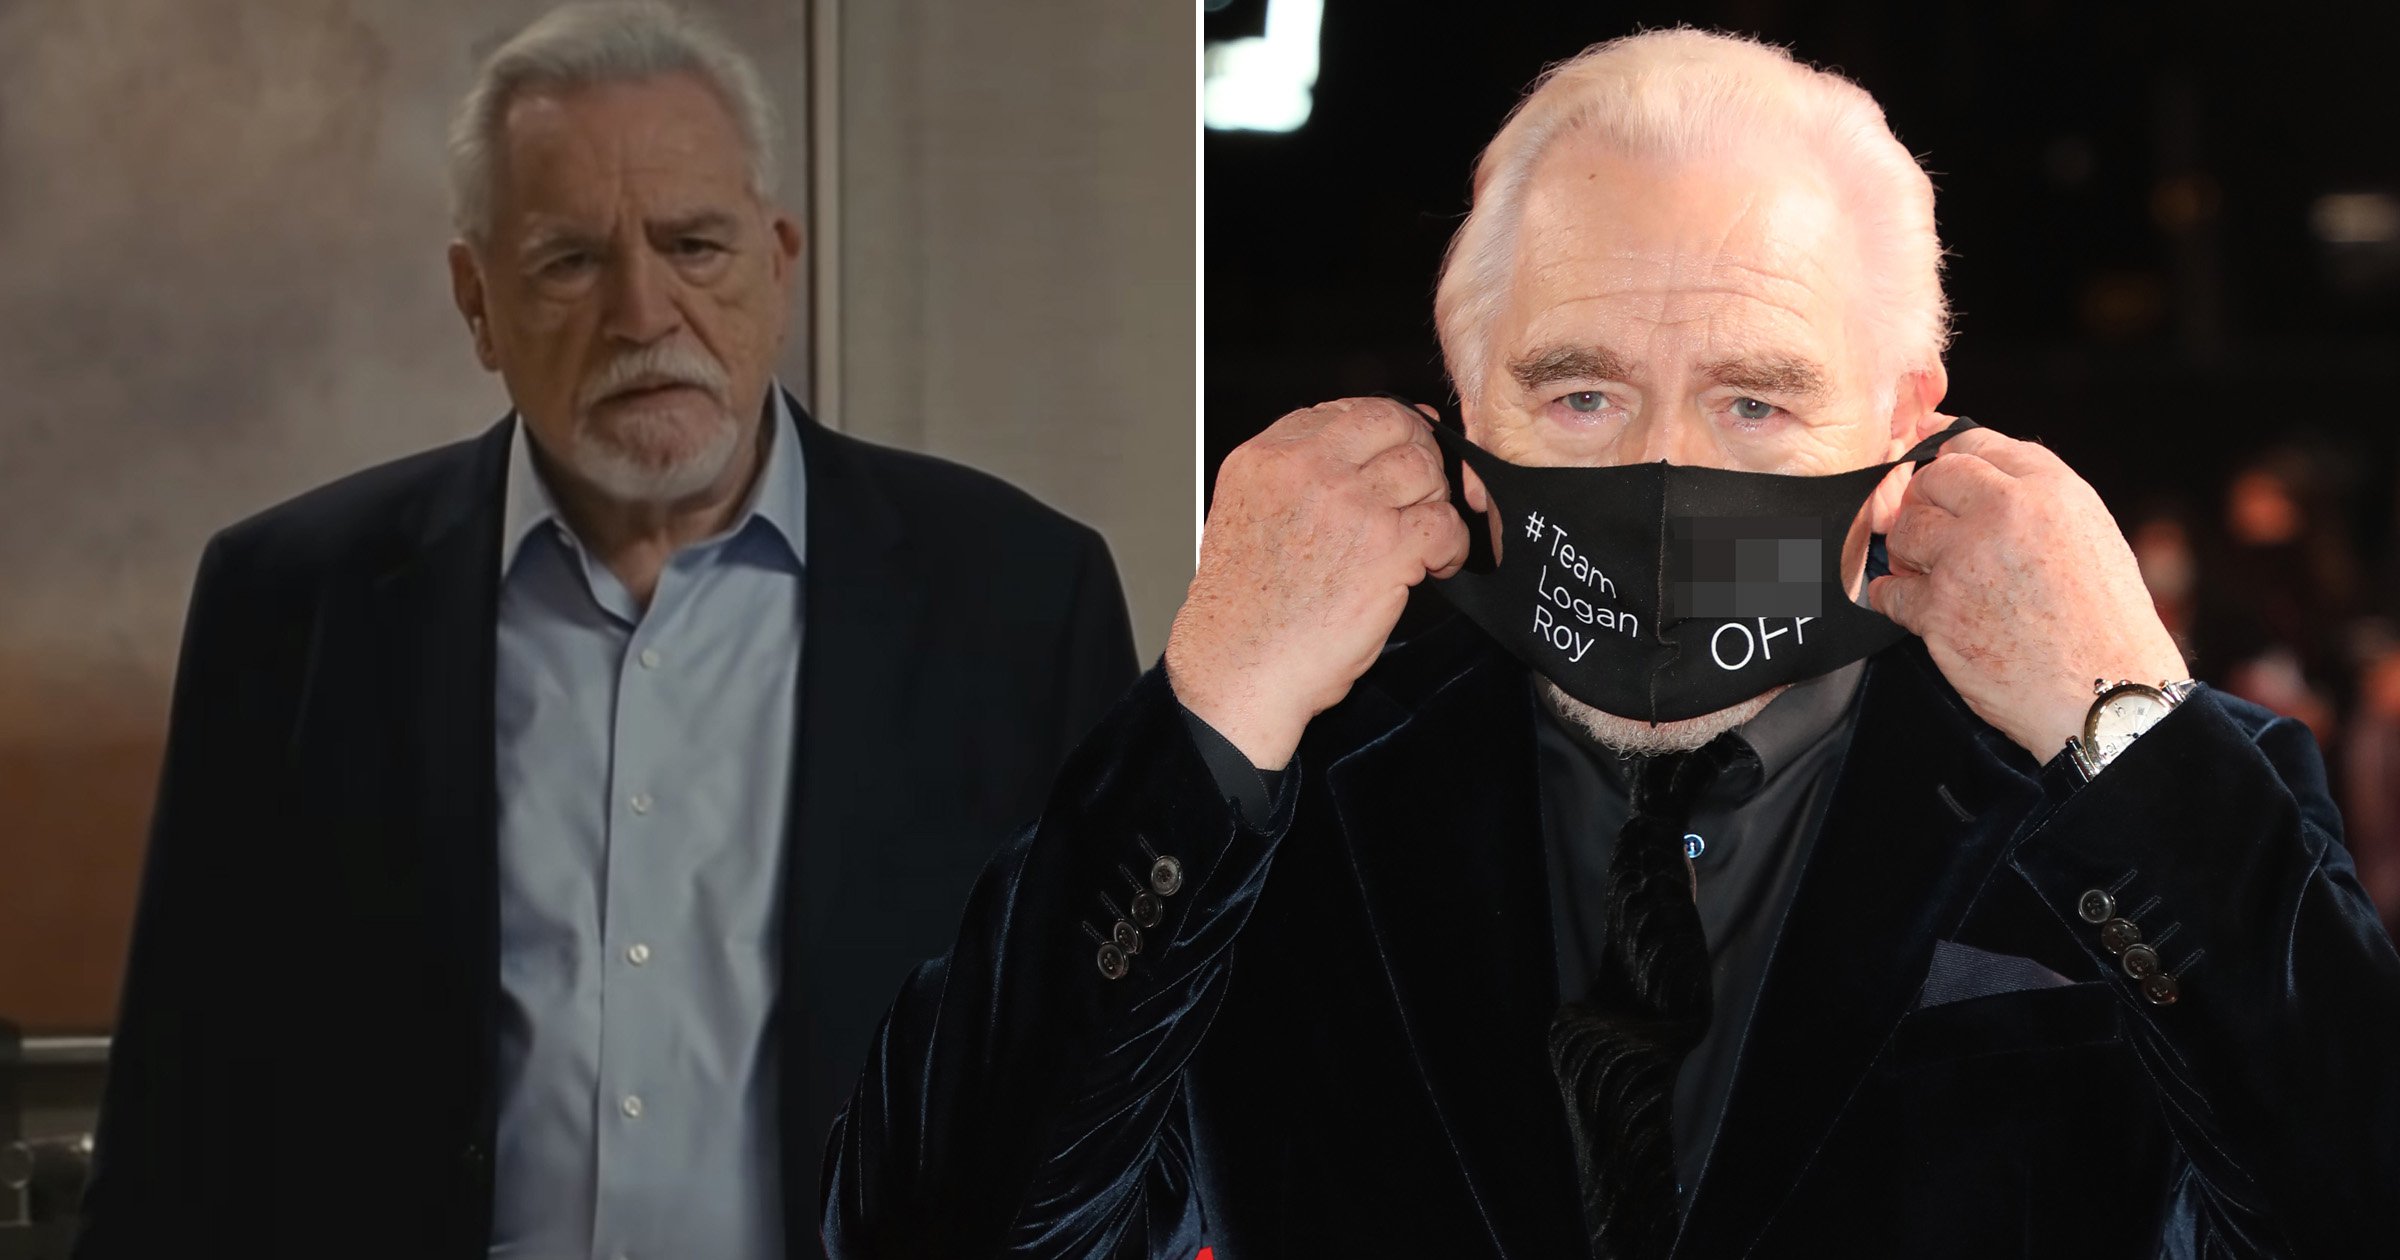 Succession’s Brian Cox dons glorious ‘f*** off’ mask in homage to his character Logan Roy at season 3 premiere